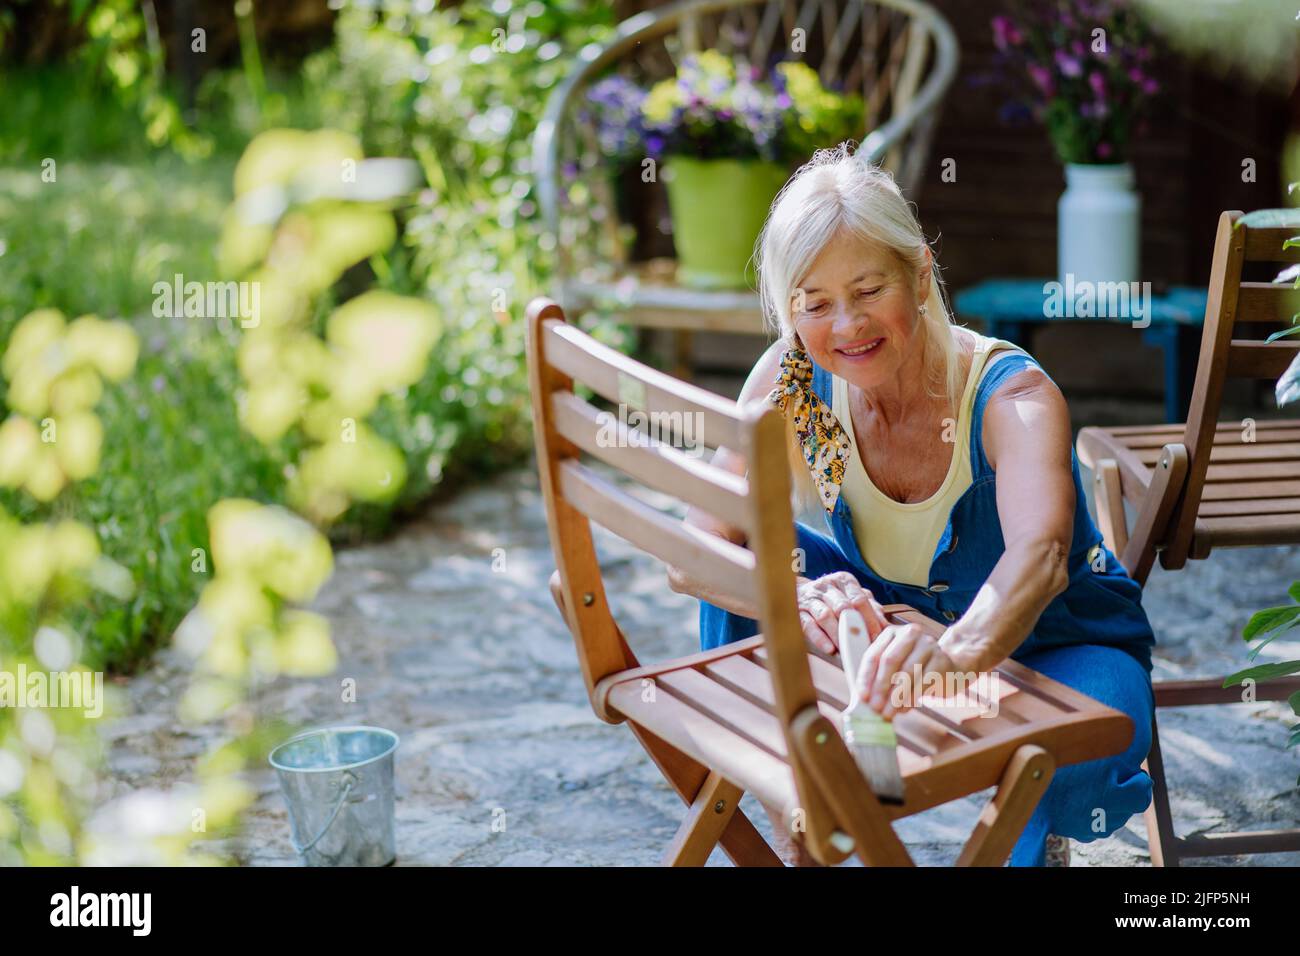 Senior woman cleaning and renovating garden furniture and getting the garden ready for summer Stock Photo